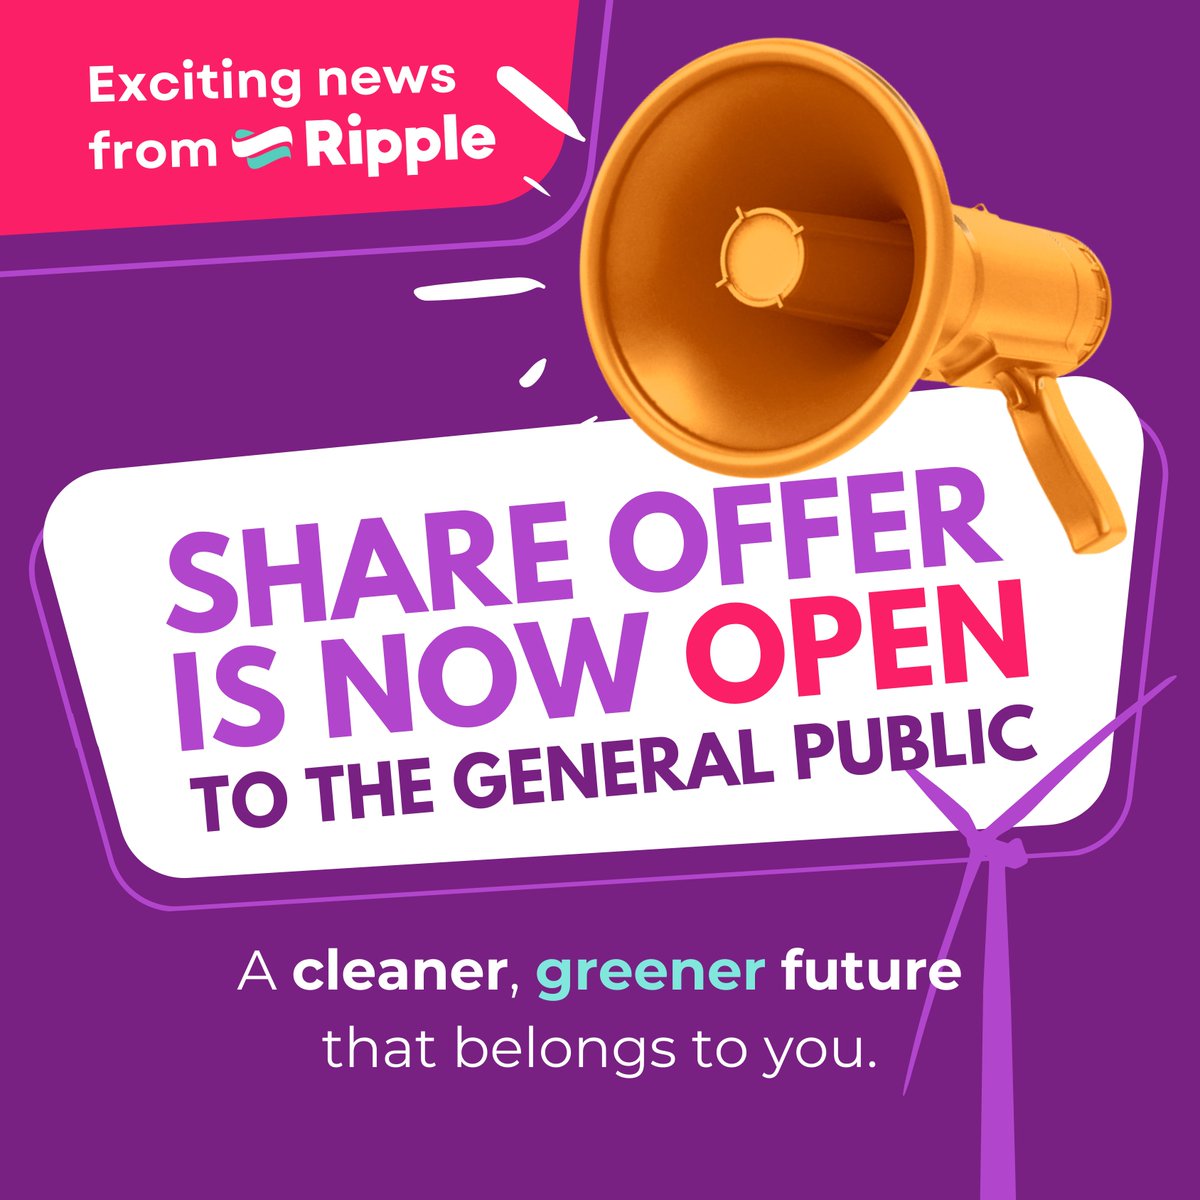 Incase you missed the news, our latest share offer is now OPEN to the general public! This is your chance to own a part of Whitelaw Brae, set to be the biggest people-owned wind farm in the UK, and take a meaningful step towards stabilising your energy bills and fighting climate…